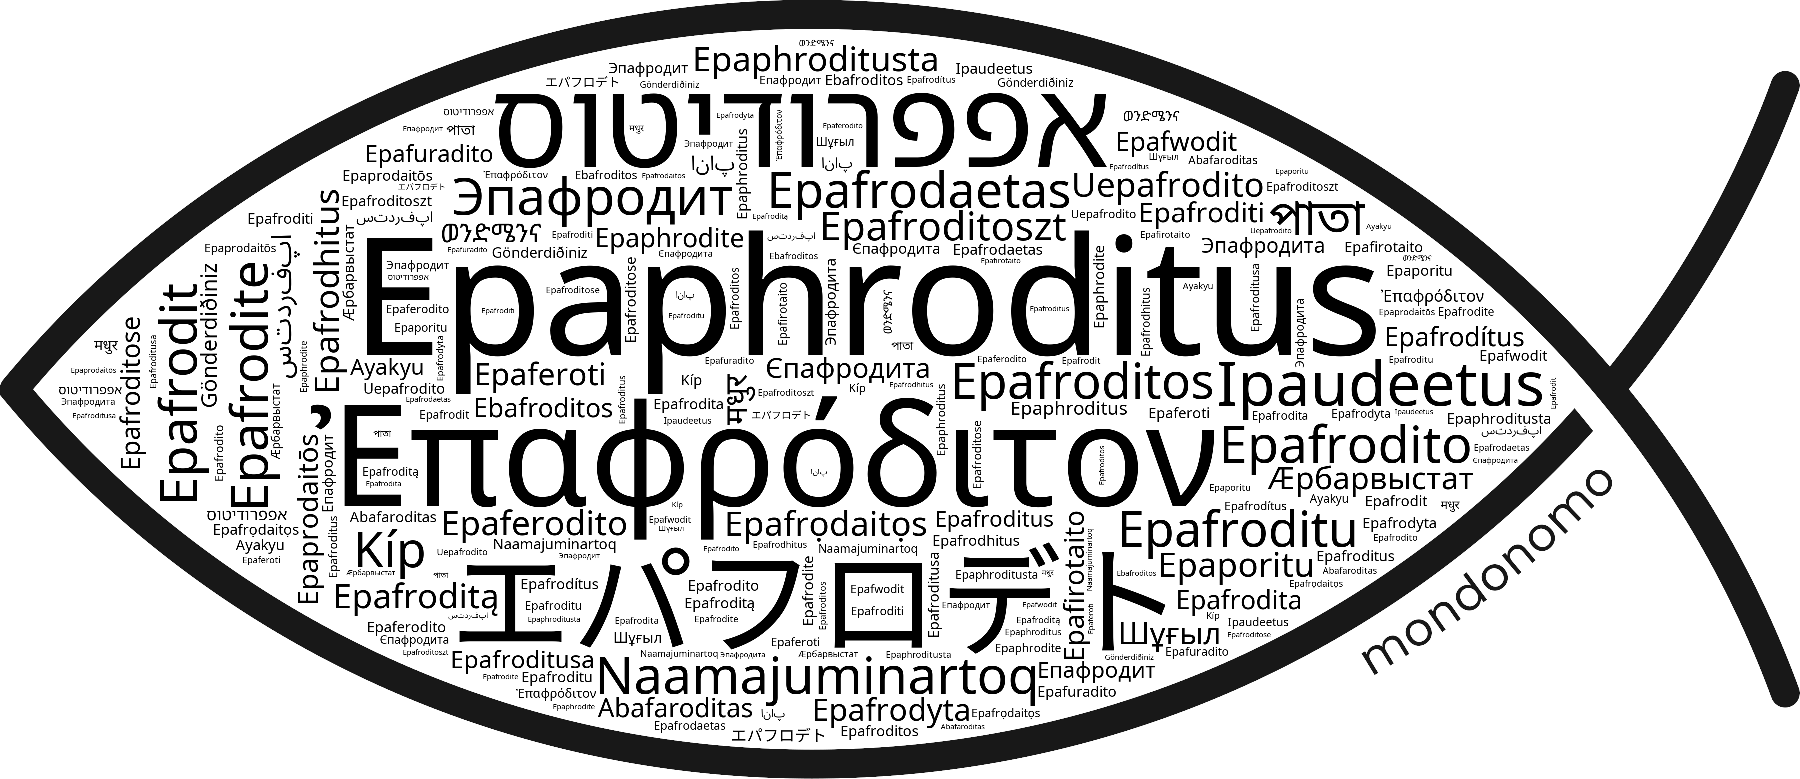 Name Epaphroditus in the world's Bibles